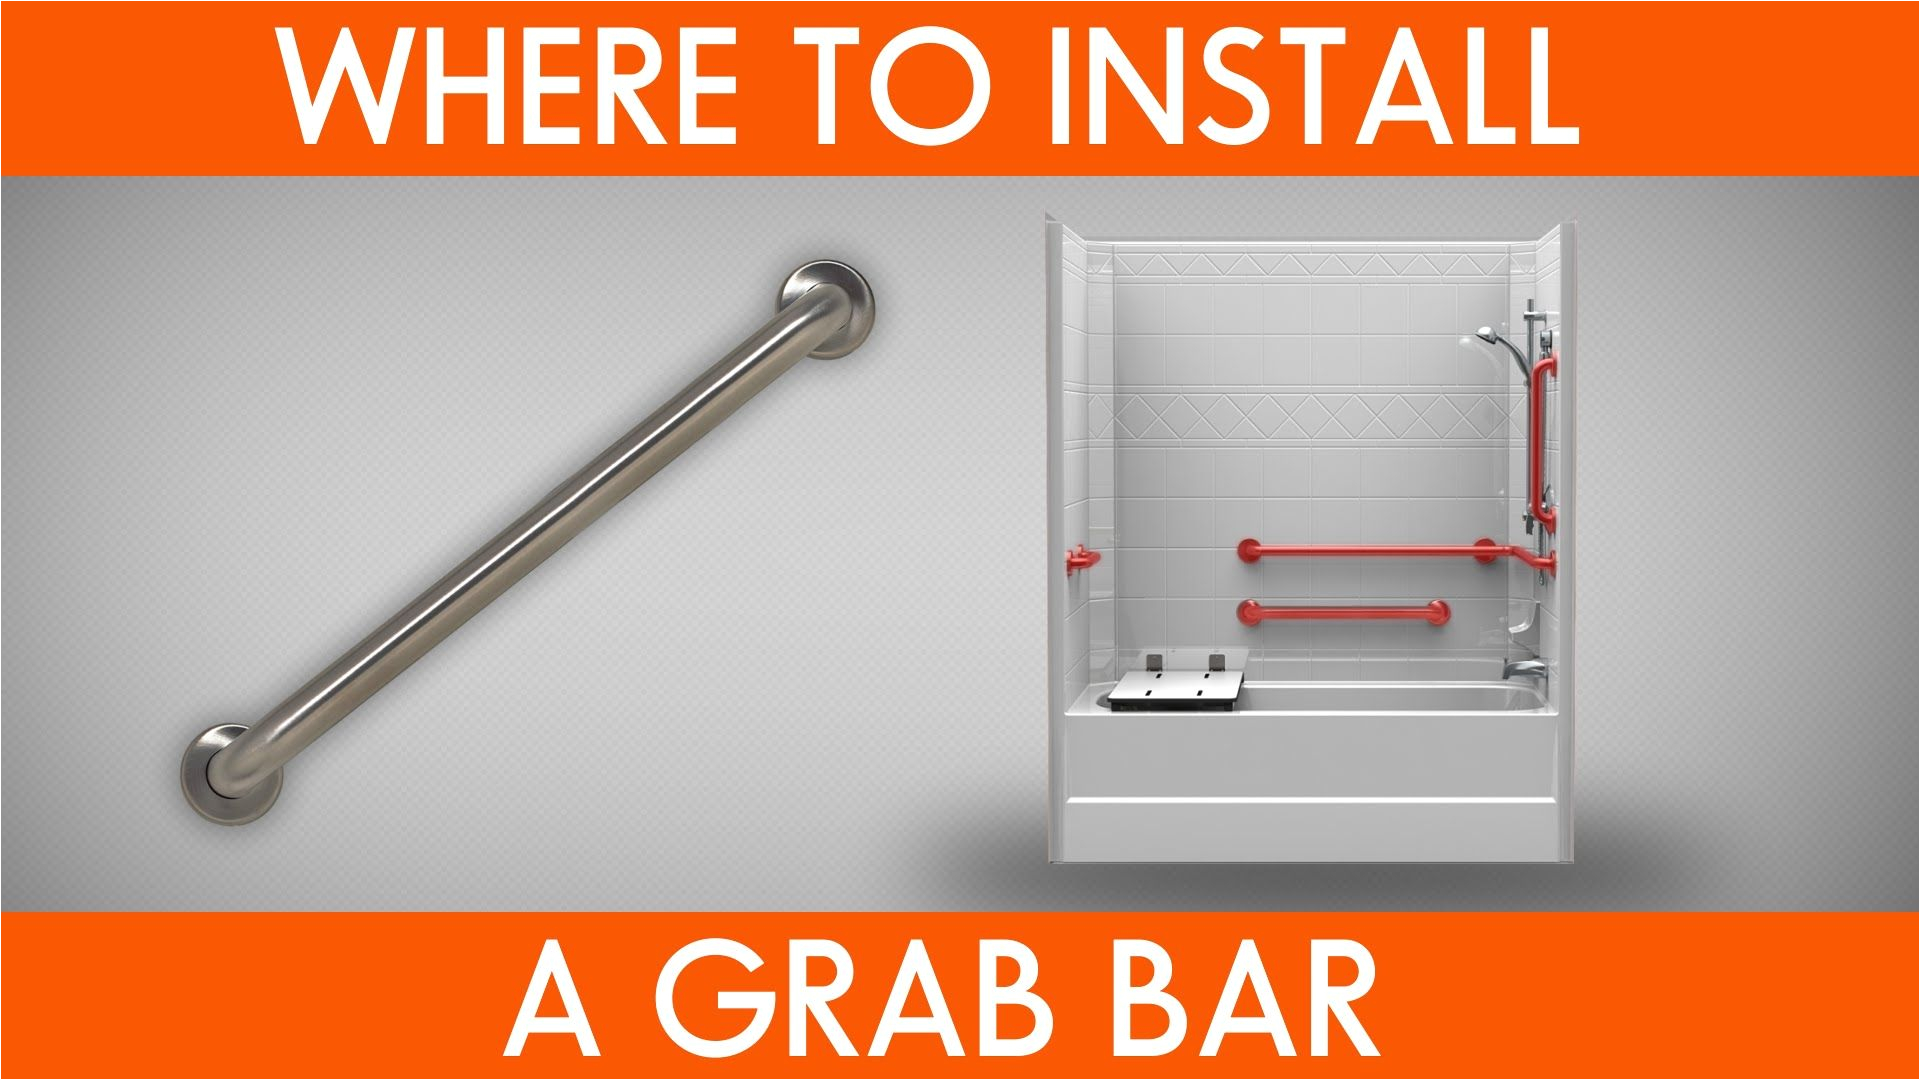 Handicap Bathtub Grab Bars Have Questions About Installing A Grab Bar Check Out Our